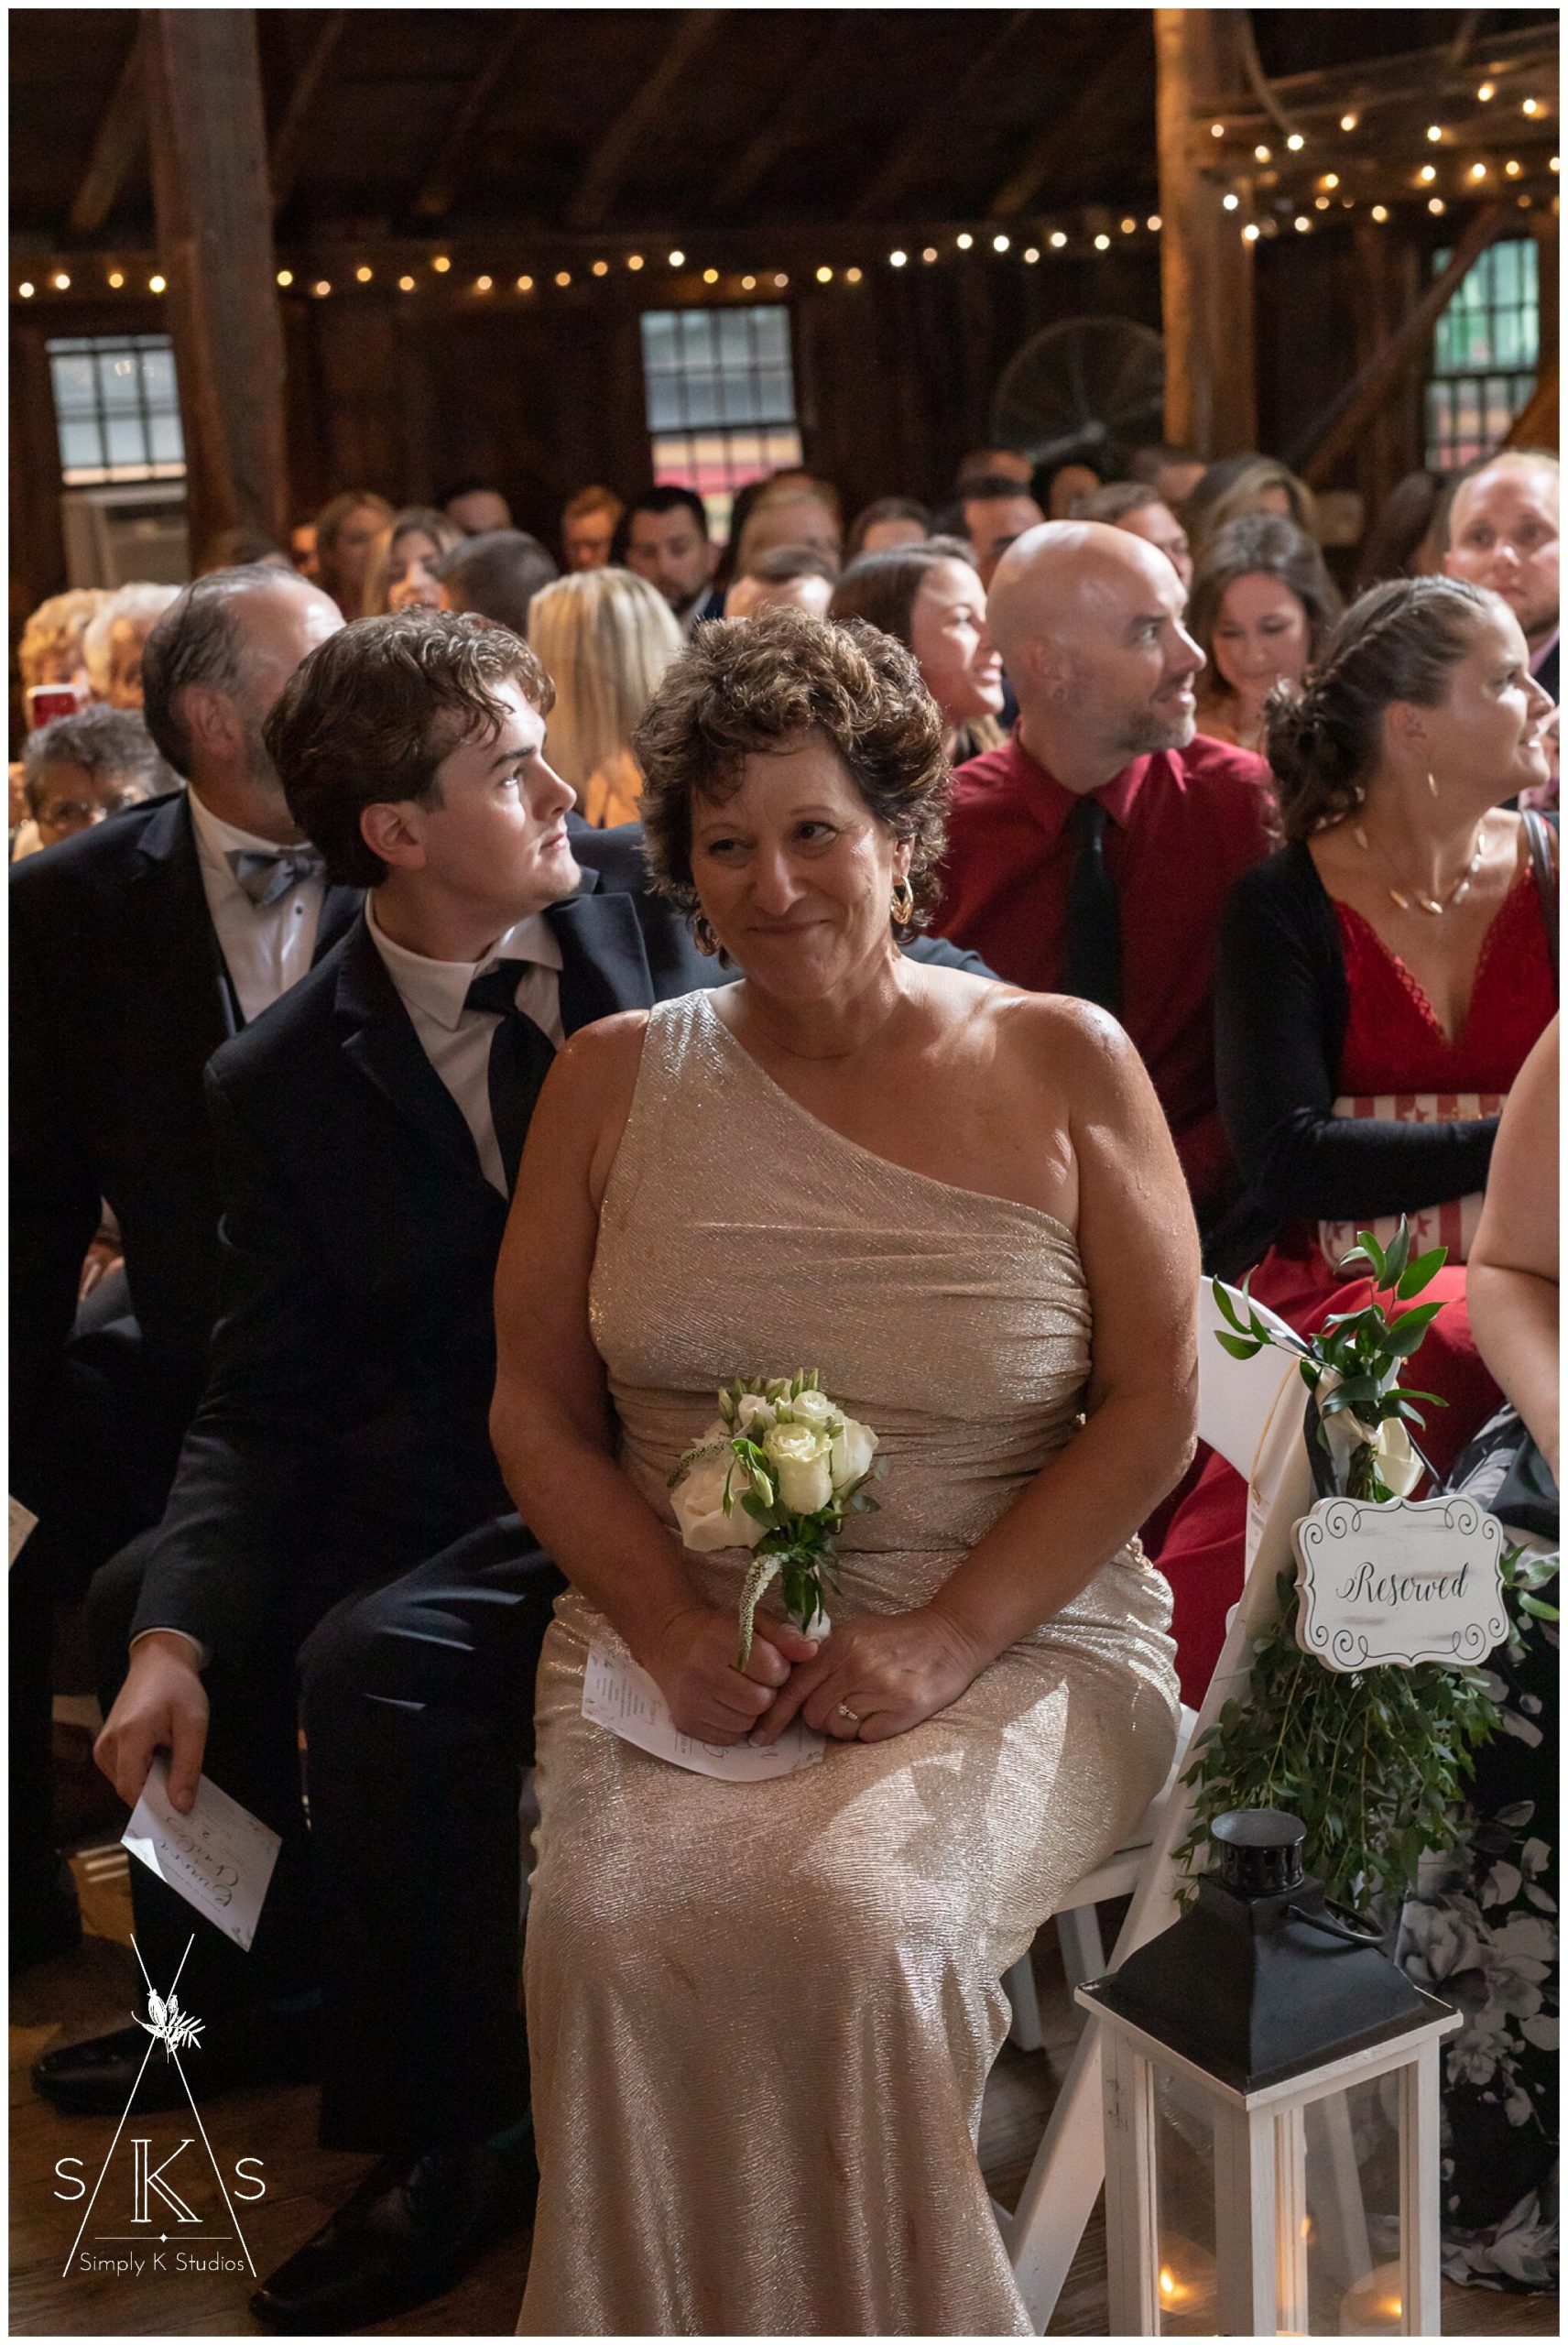 80 Mother of the Groom at a ceremony.jpg